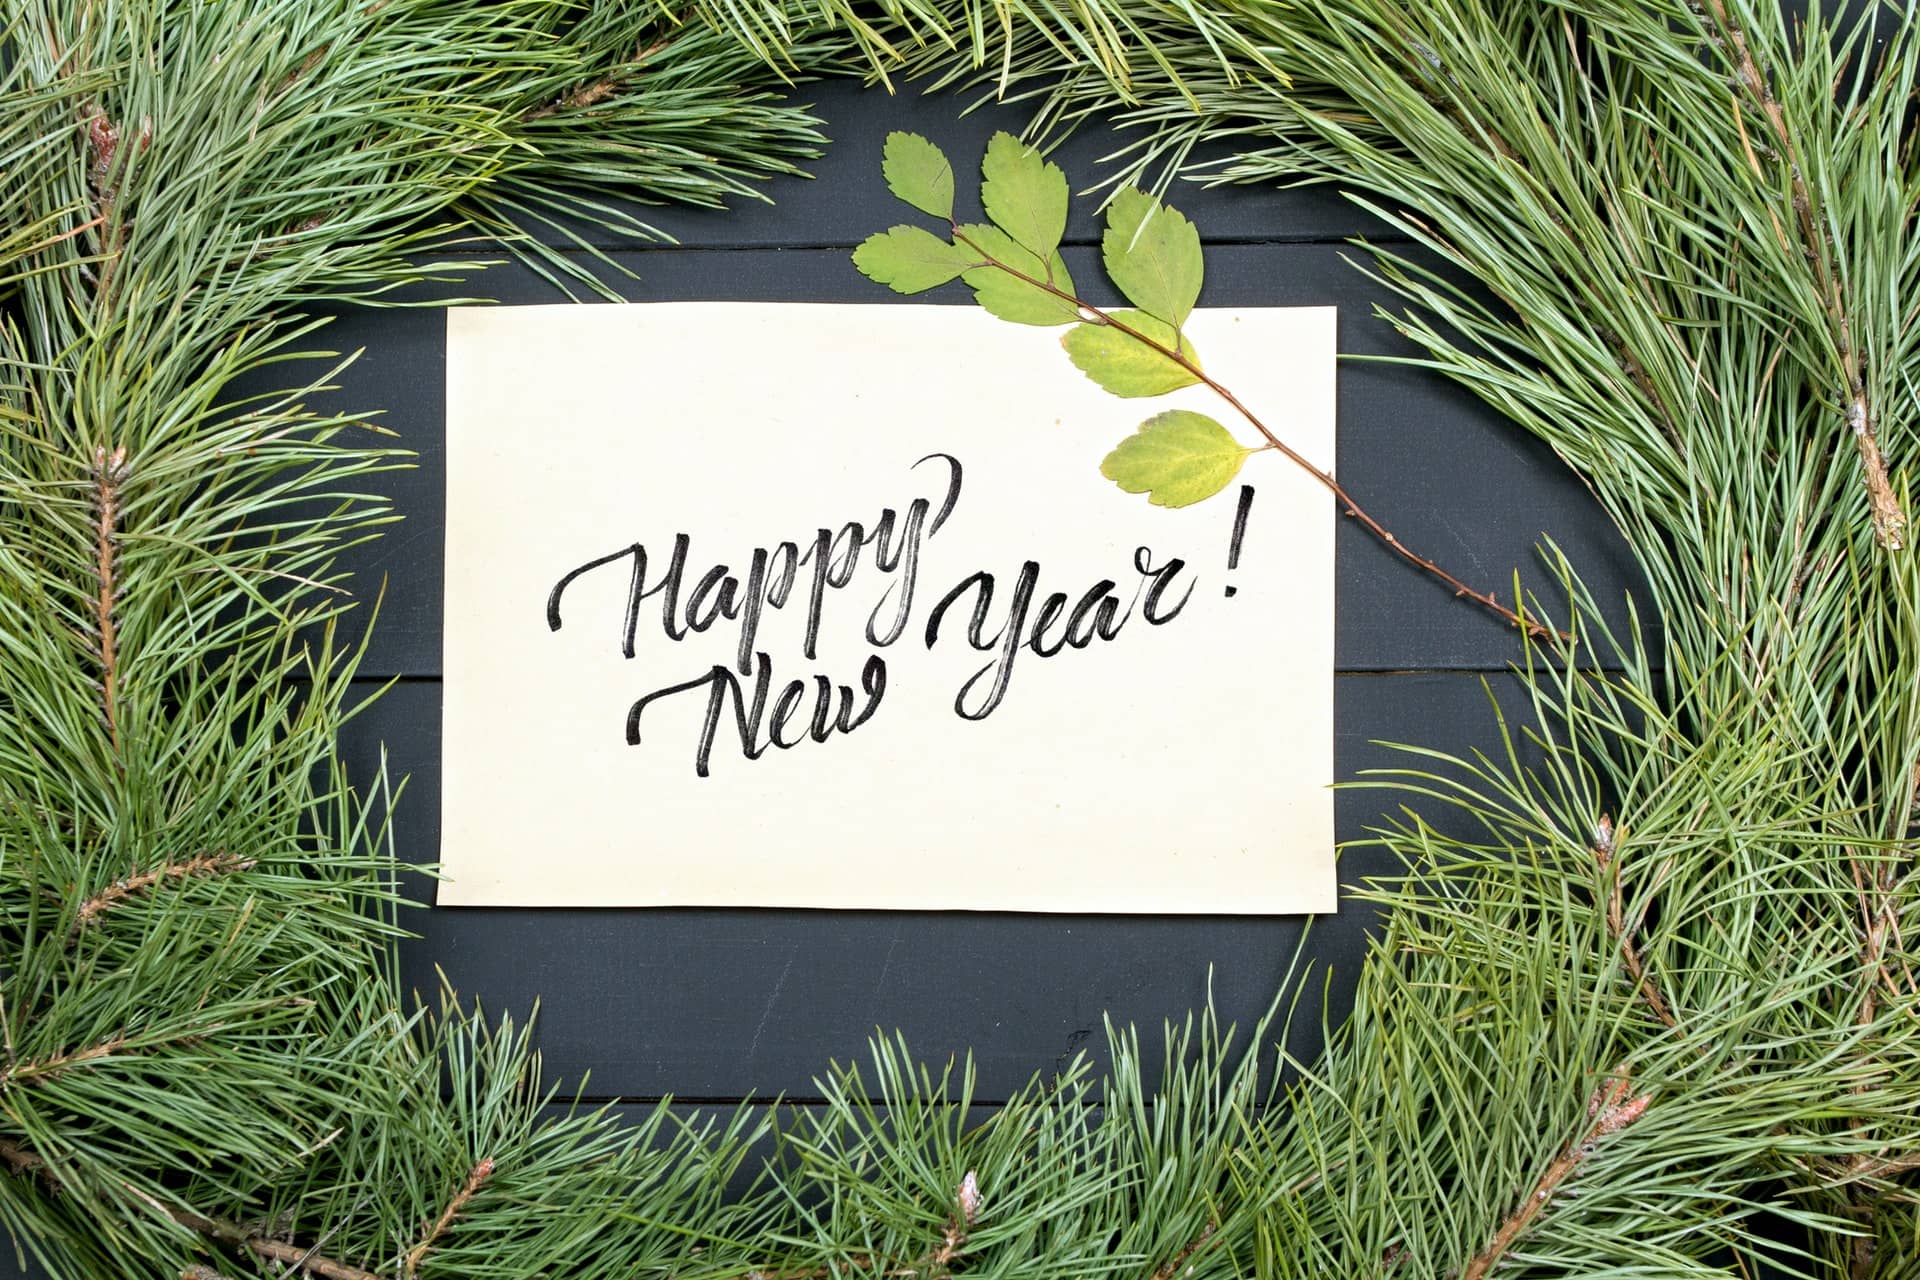 a paper with happy new year written on it surrounded by pine